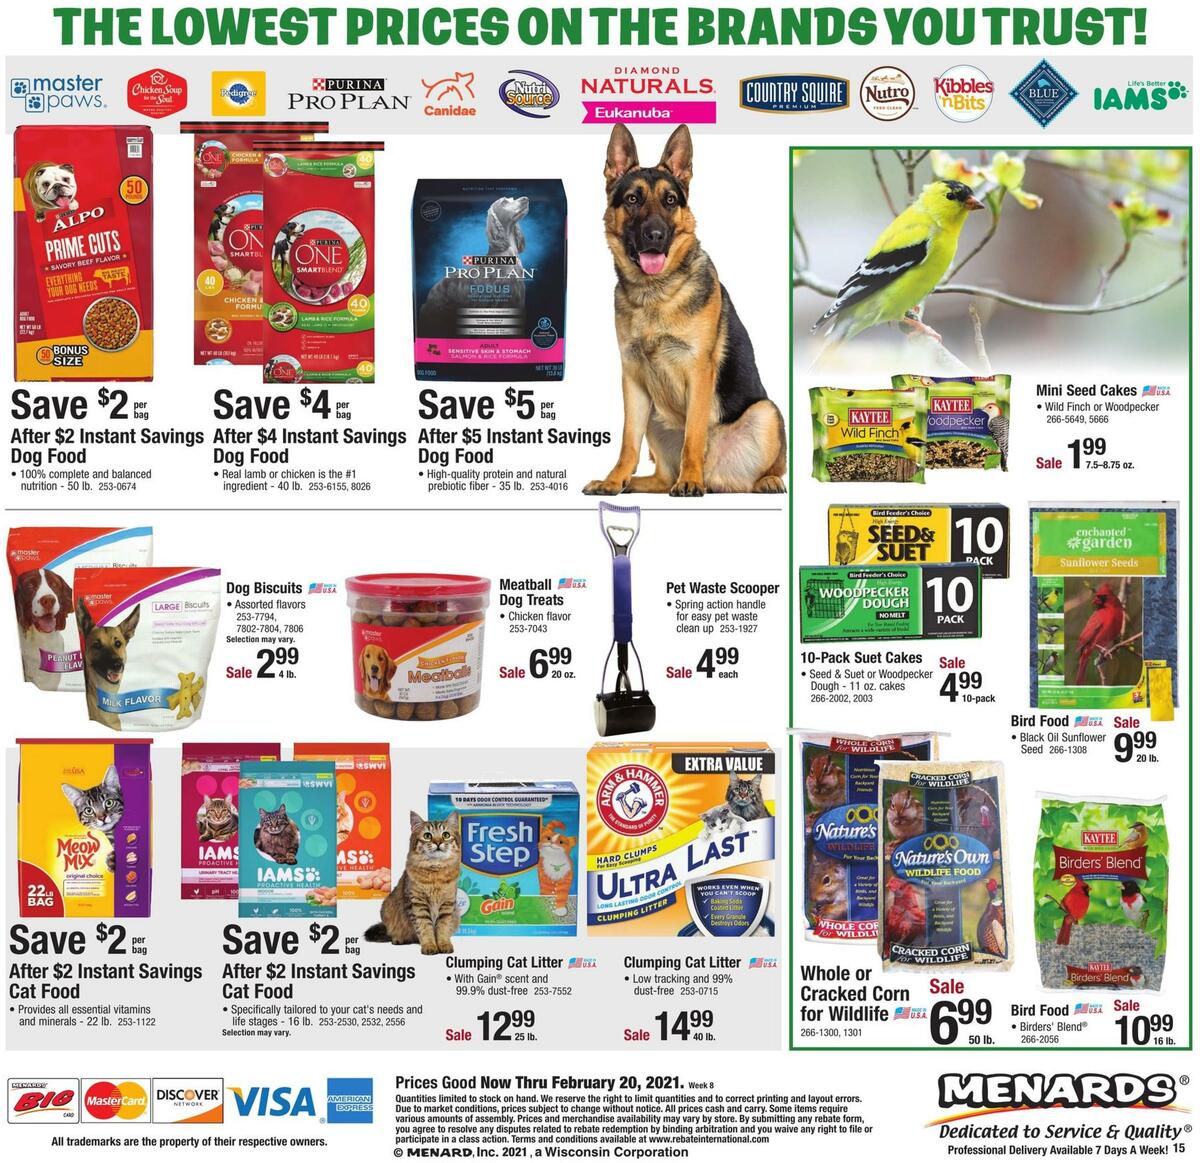 Menards Weekly Ads & Special Buys for February 14 - Page 17